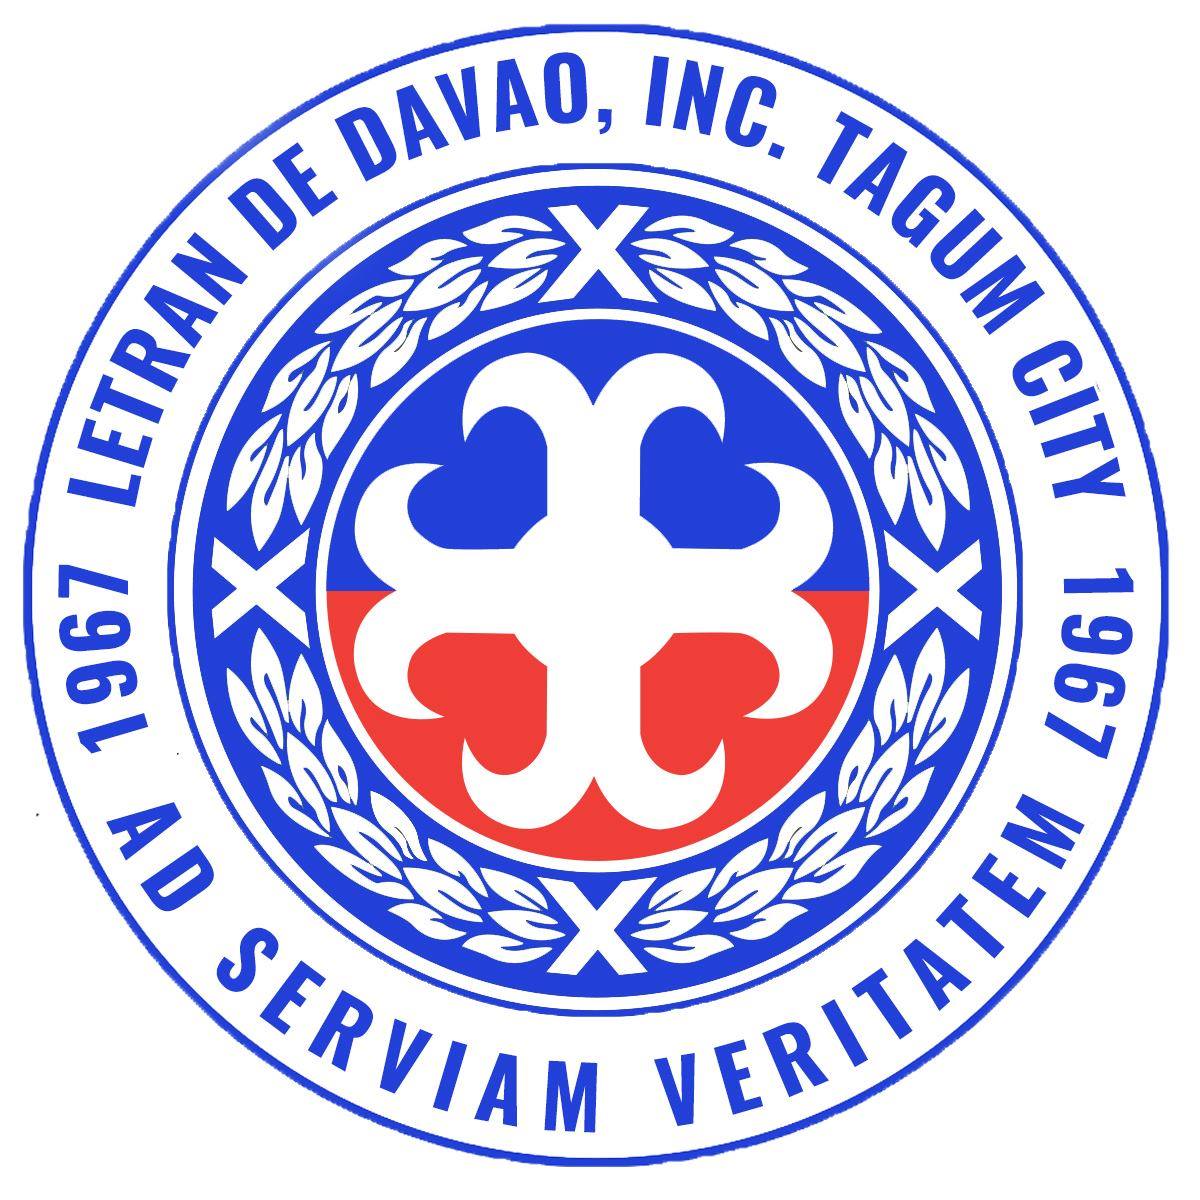 You are currently viewing Letran De Davao Inc – Tagum City